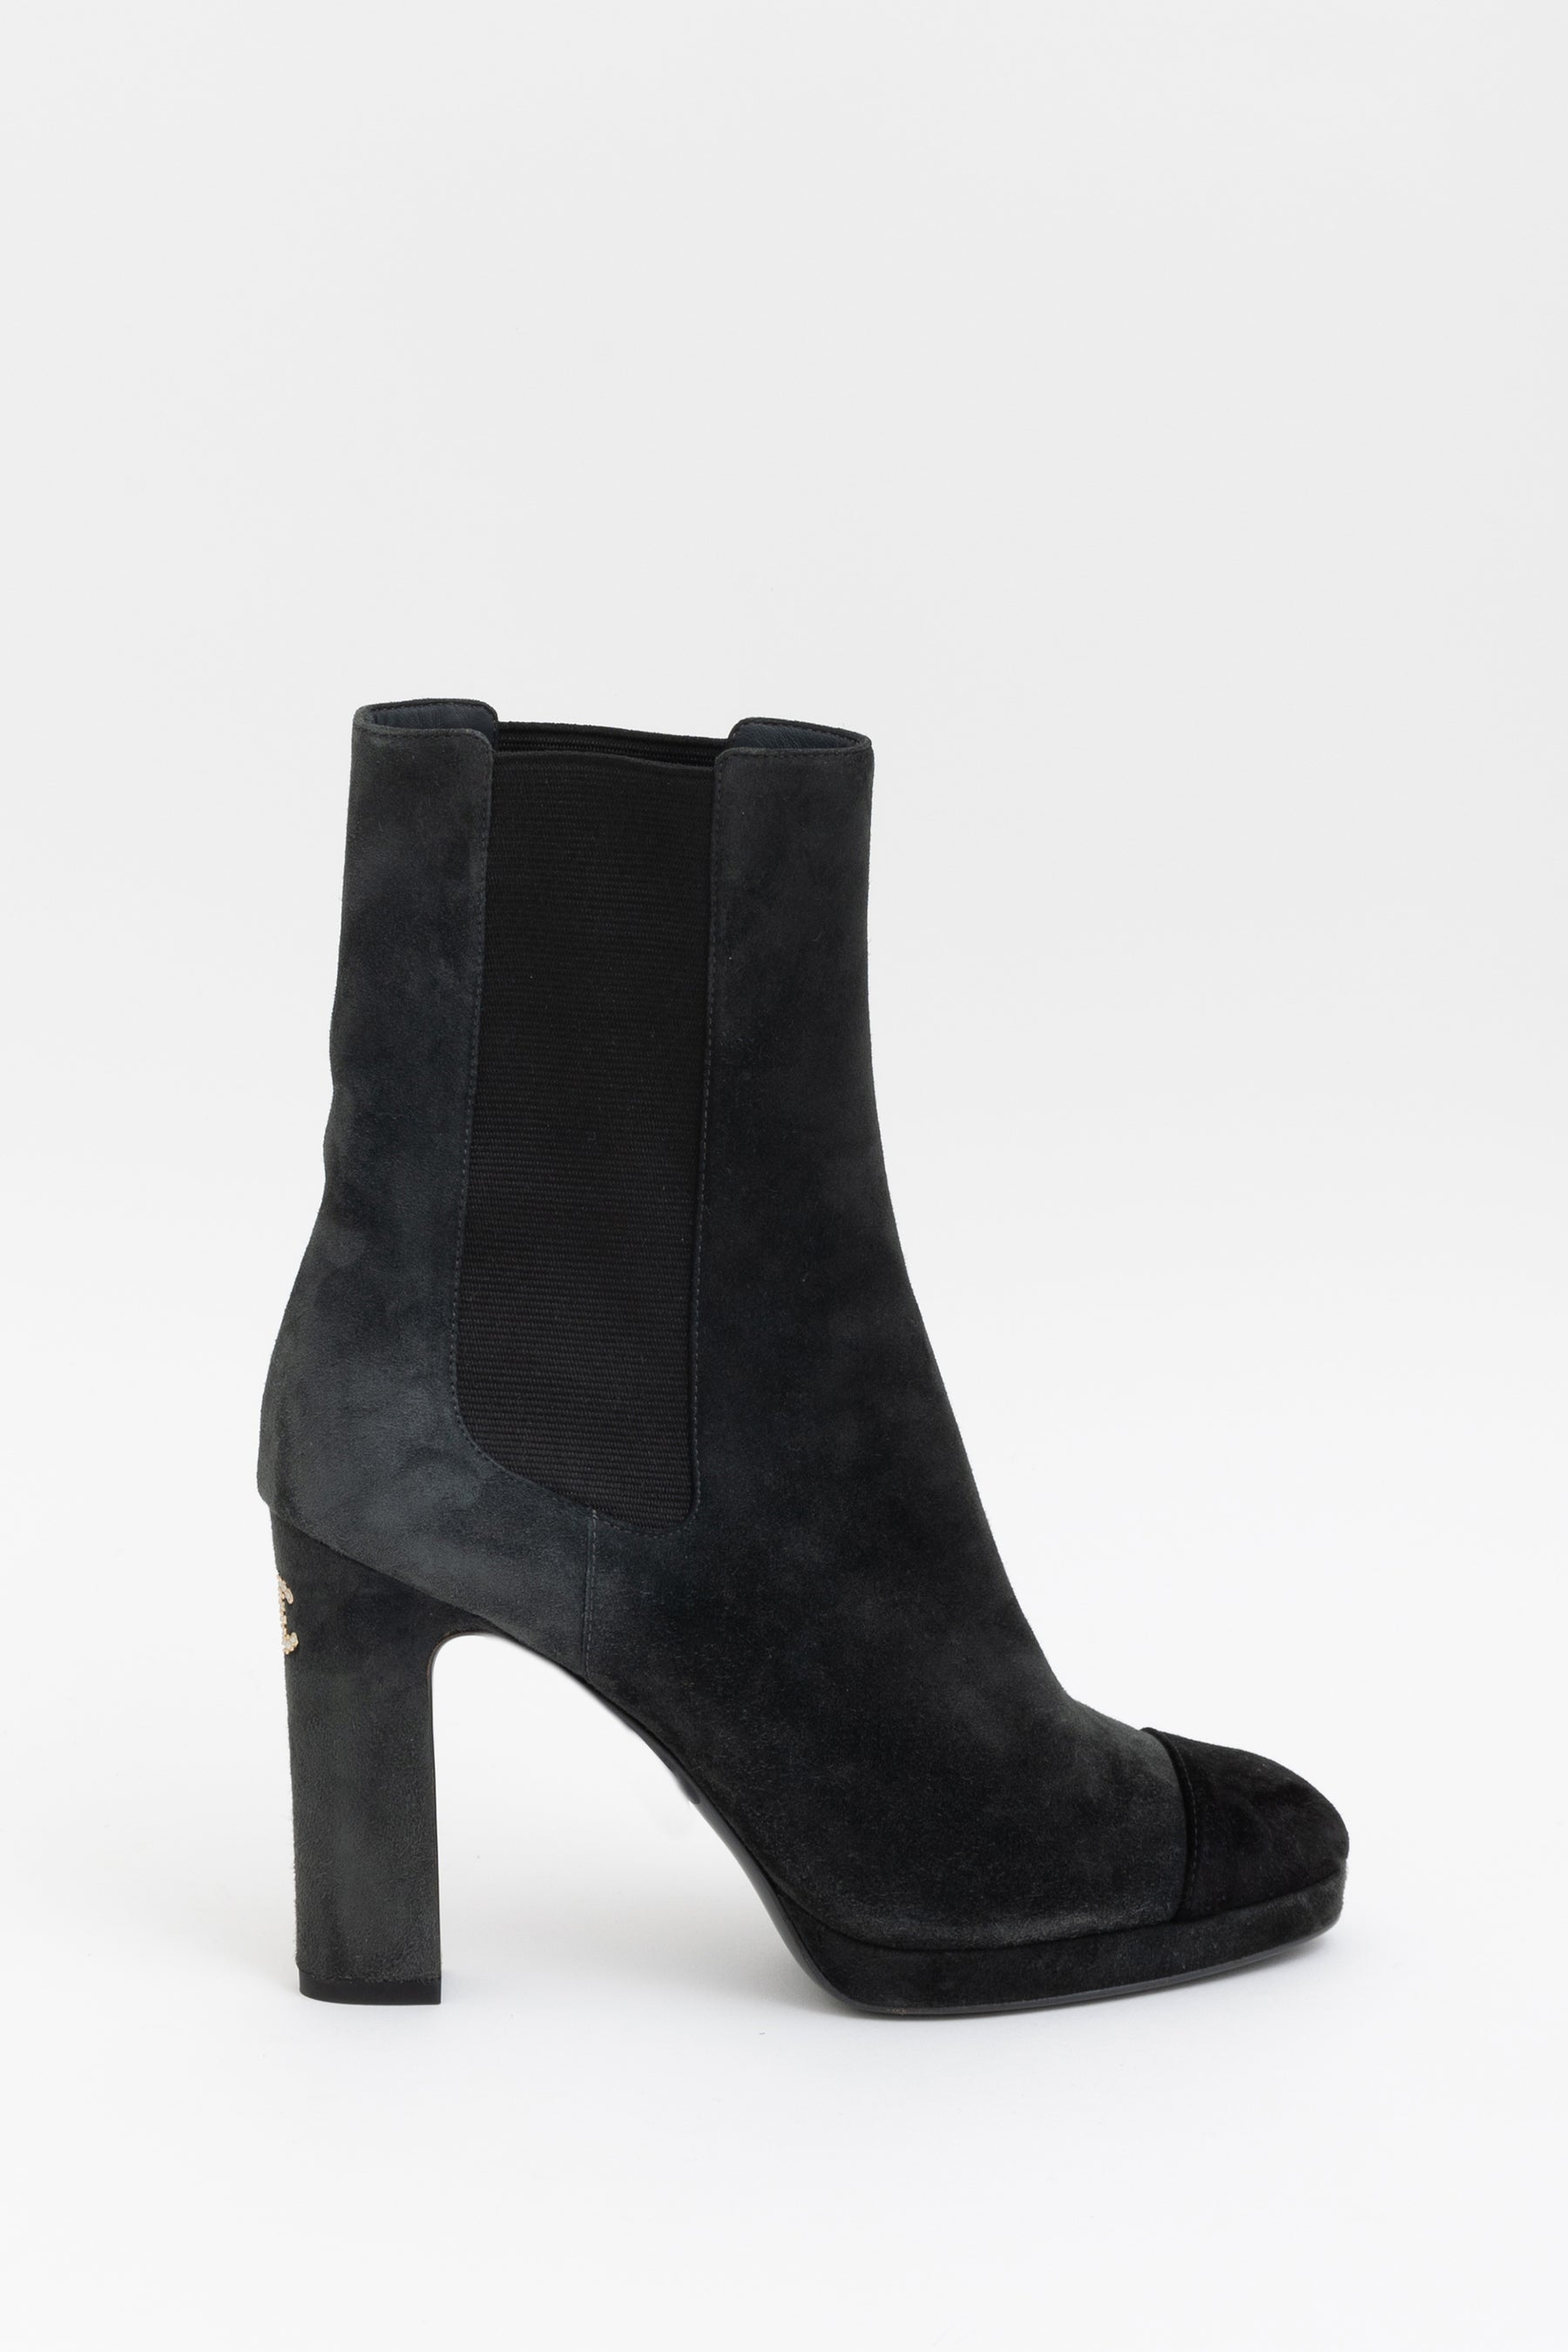 Suede Heeled Boots